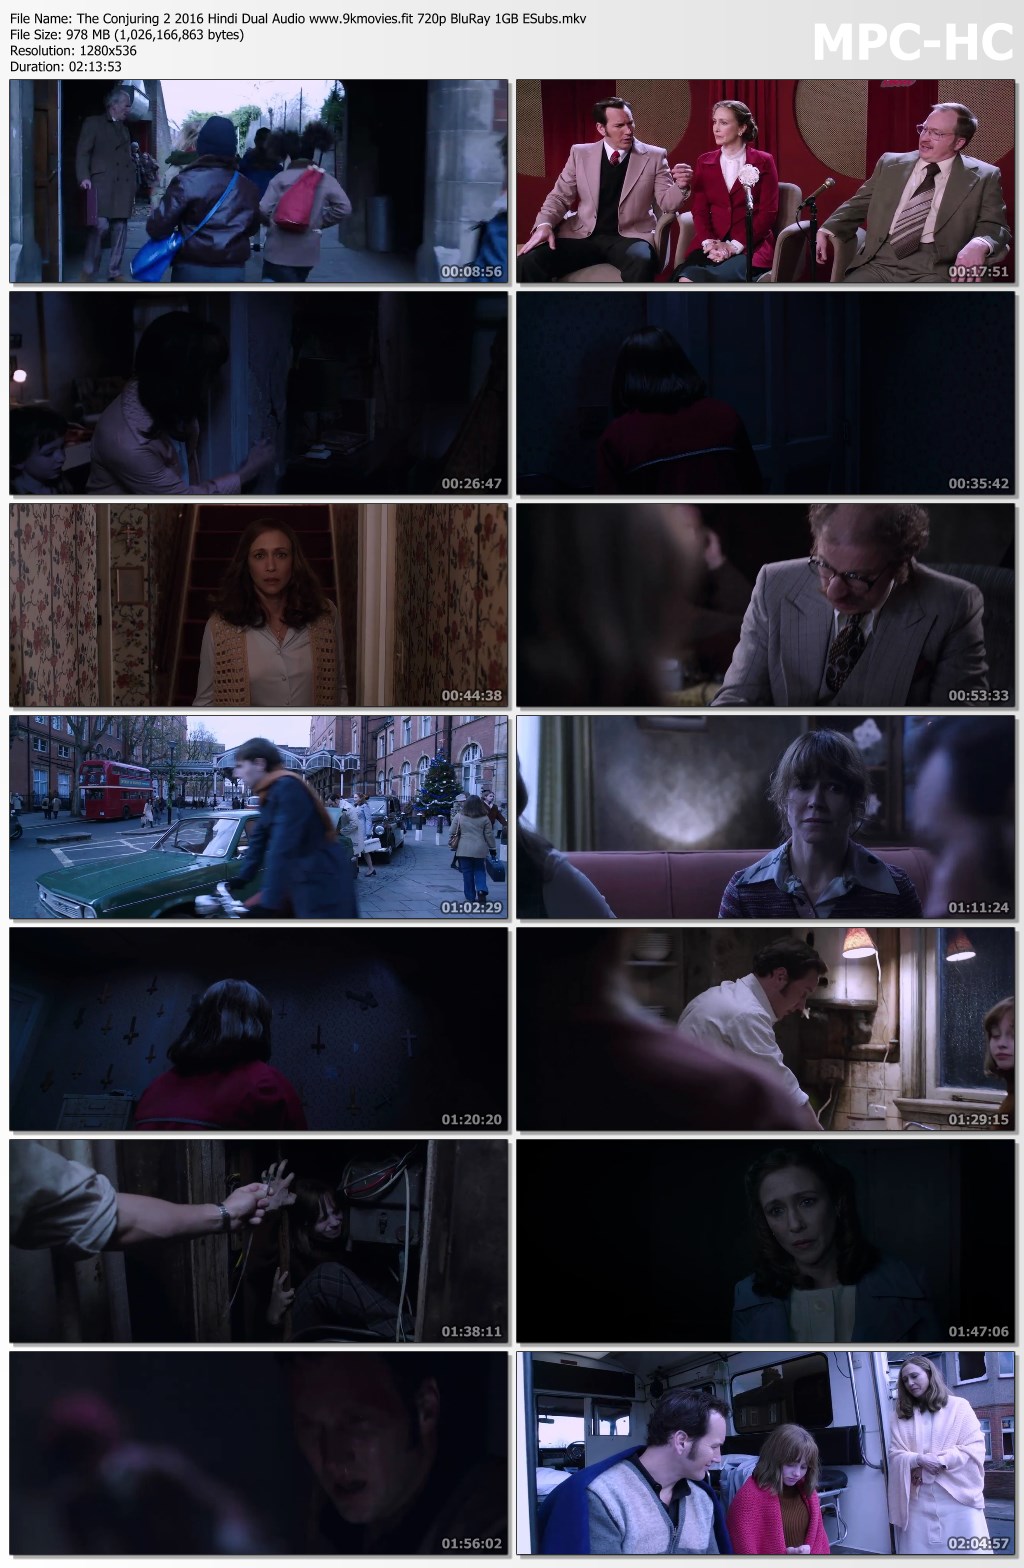 the conjuring 2 full movie online download